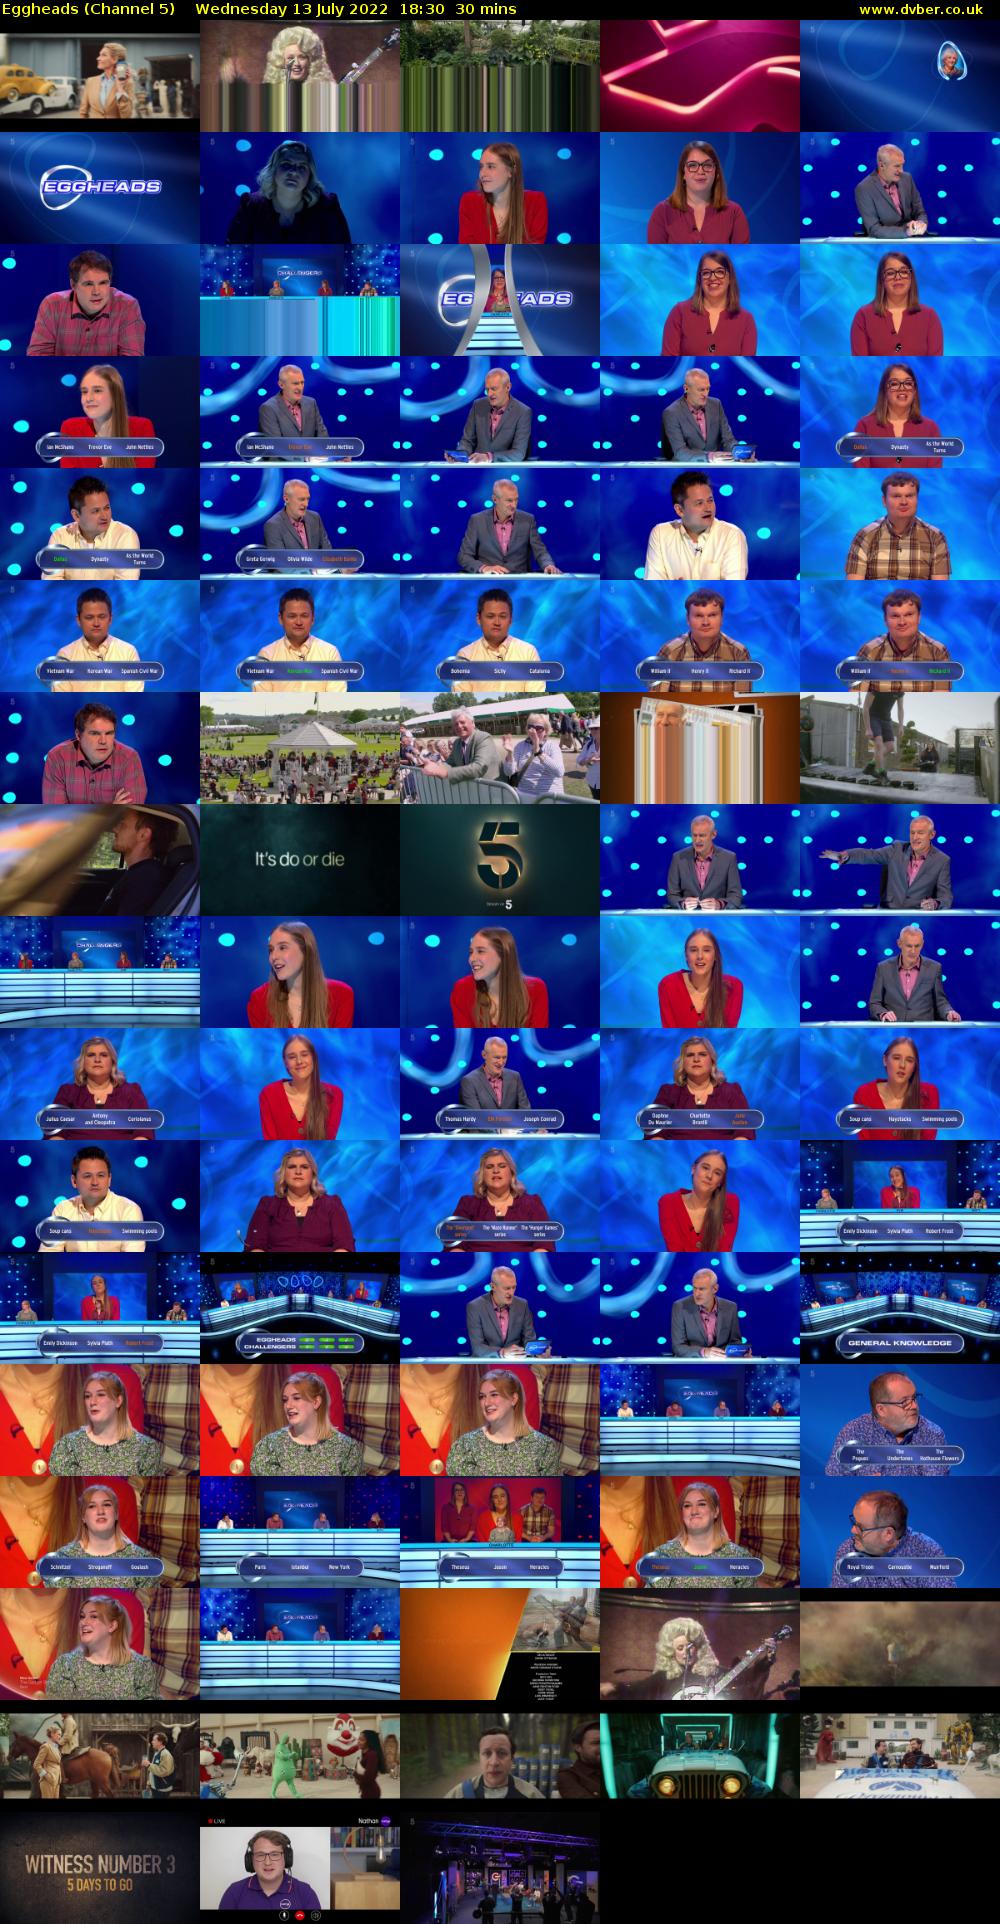 Eggheads (Channel 5) Wednesday 13 July 2022 18:30 - 19:00